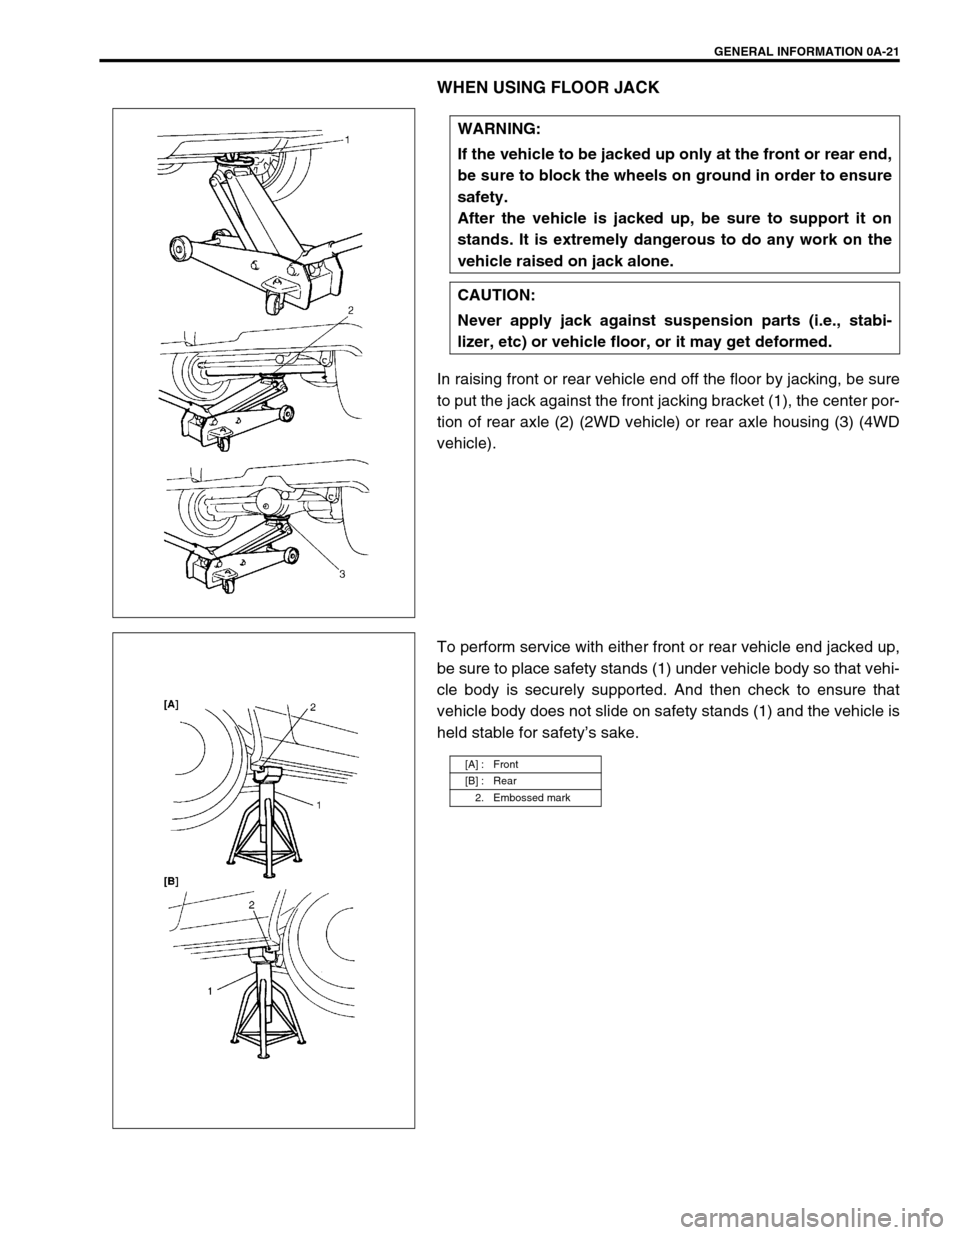 SUZUKI SWIFT 2000 1.G RG413 Service Workshop Manual GENERAL INFORMATION 0A-21
WHEN USING FLOOR JACK
In raising front or rear vehicle end off the floor by jacking, be sure
to put the jack against the front jacking bracket (1), the center por-
tion of re